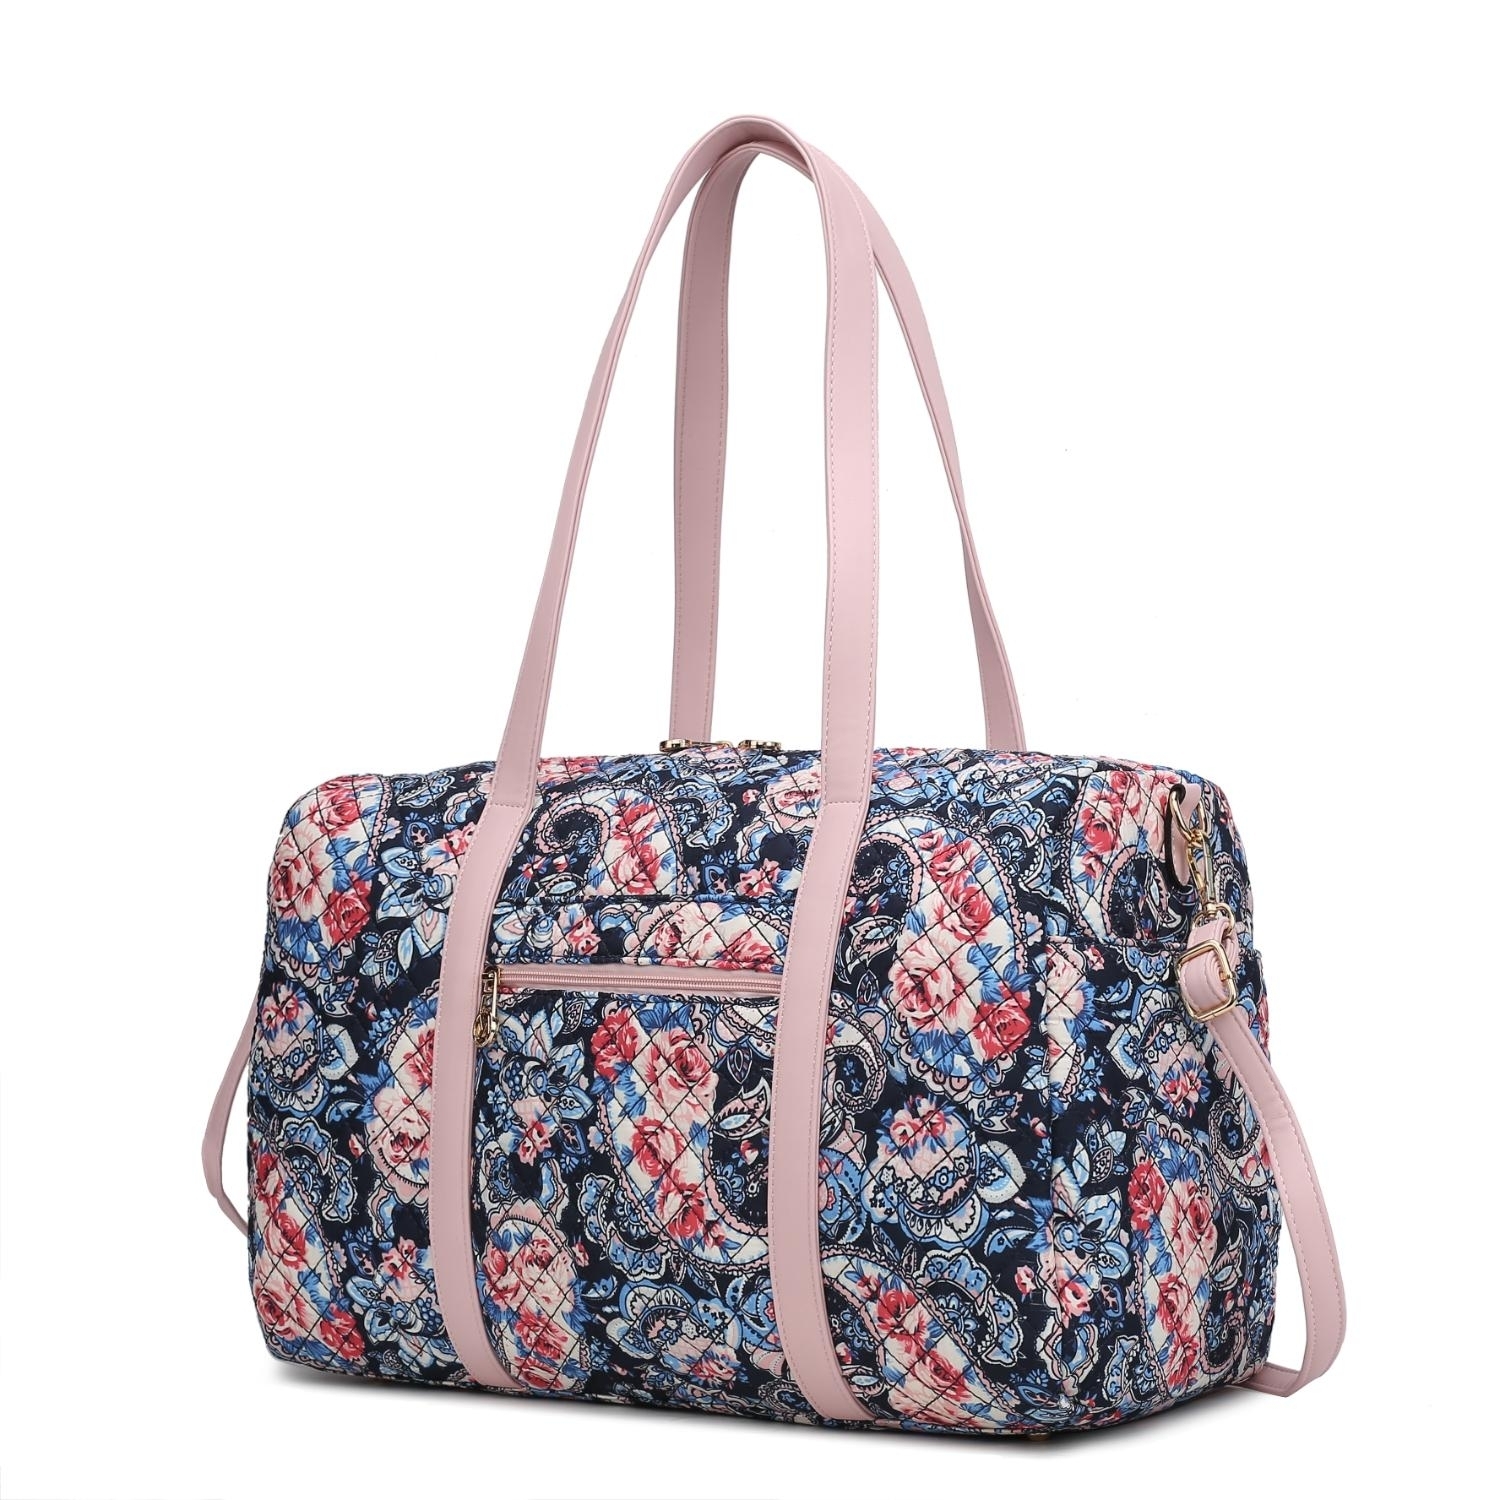 MKF Collection Khelani Quilted Cotton Botanical Pattern Women's Duffle Bag By Mia K - Blue